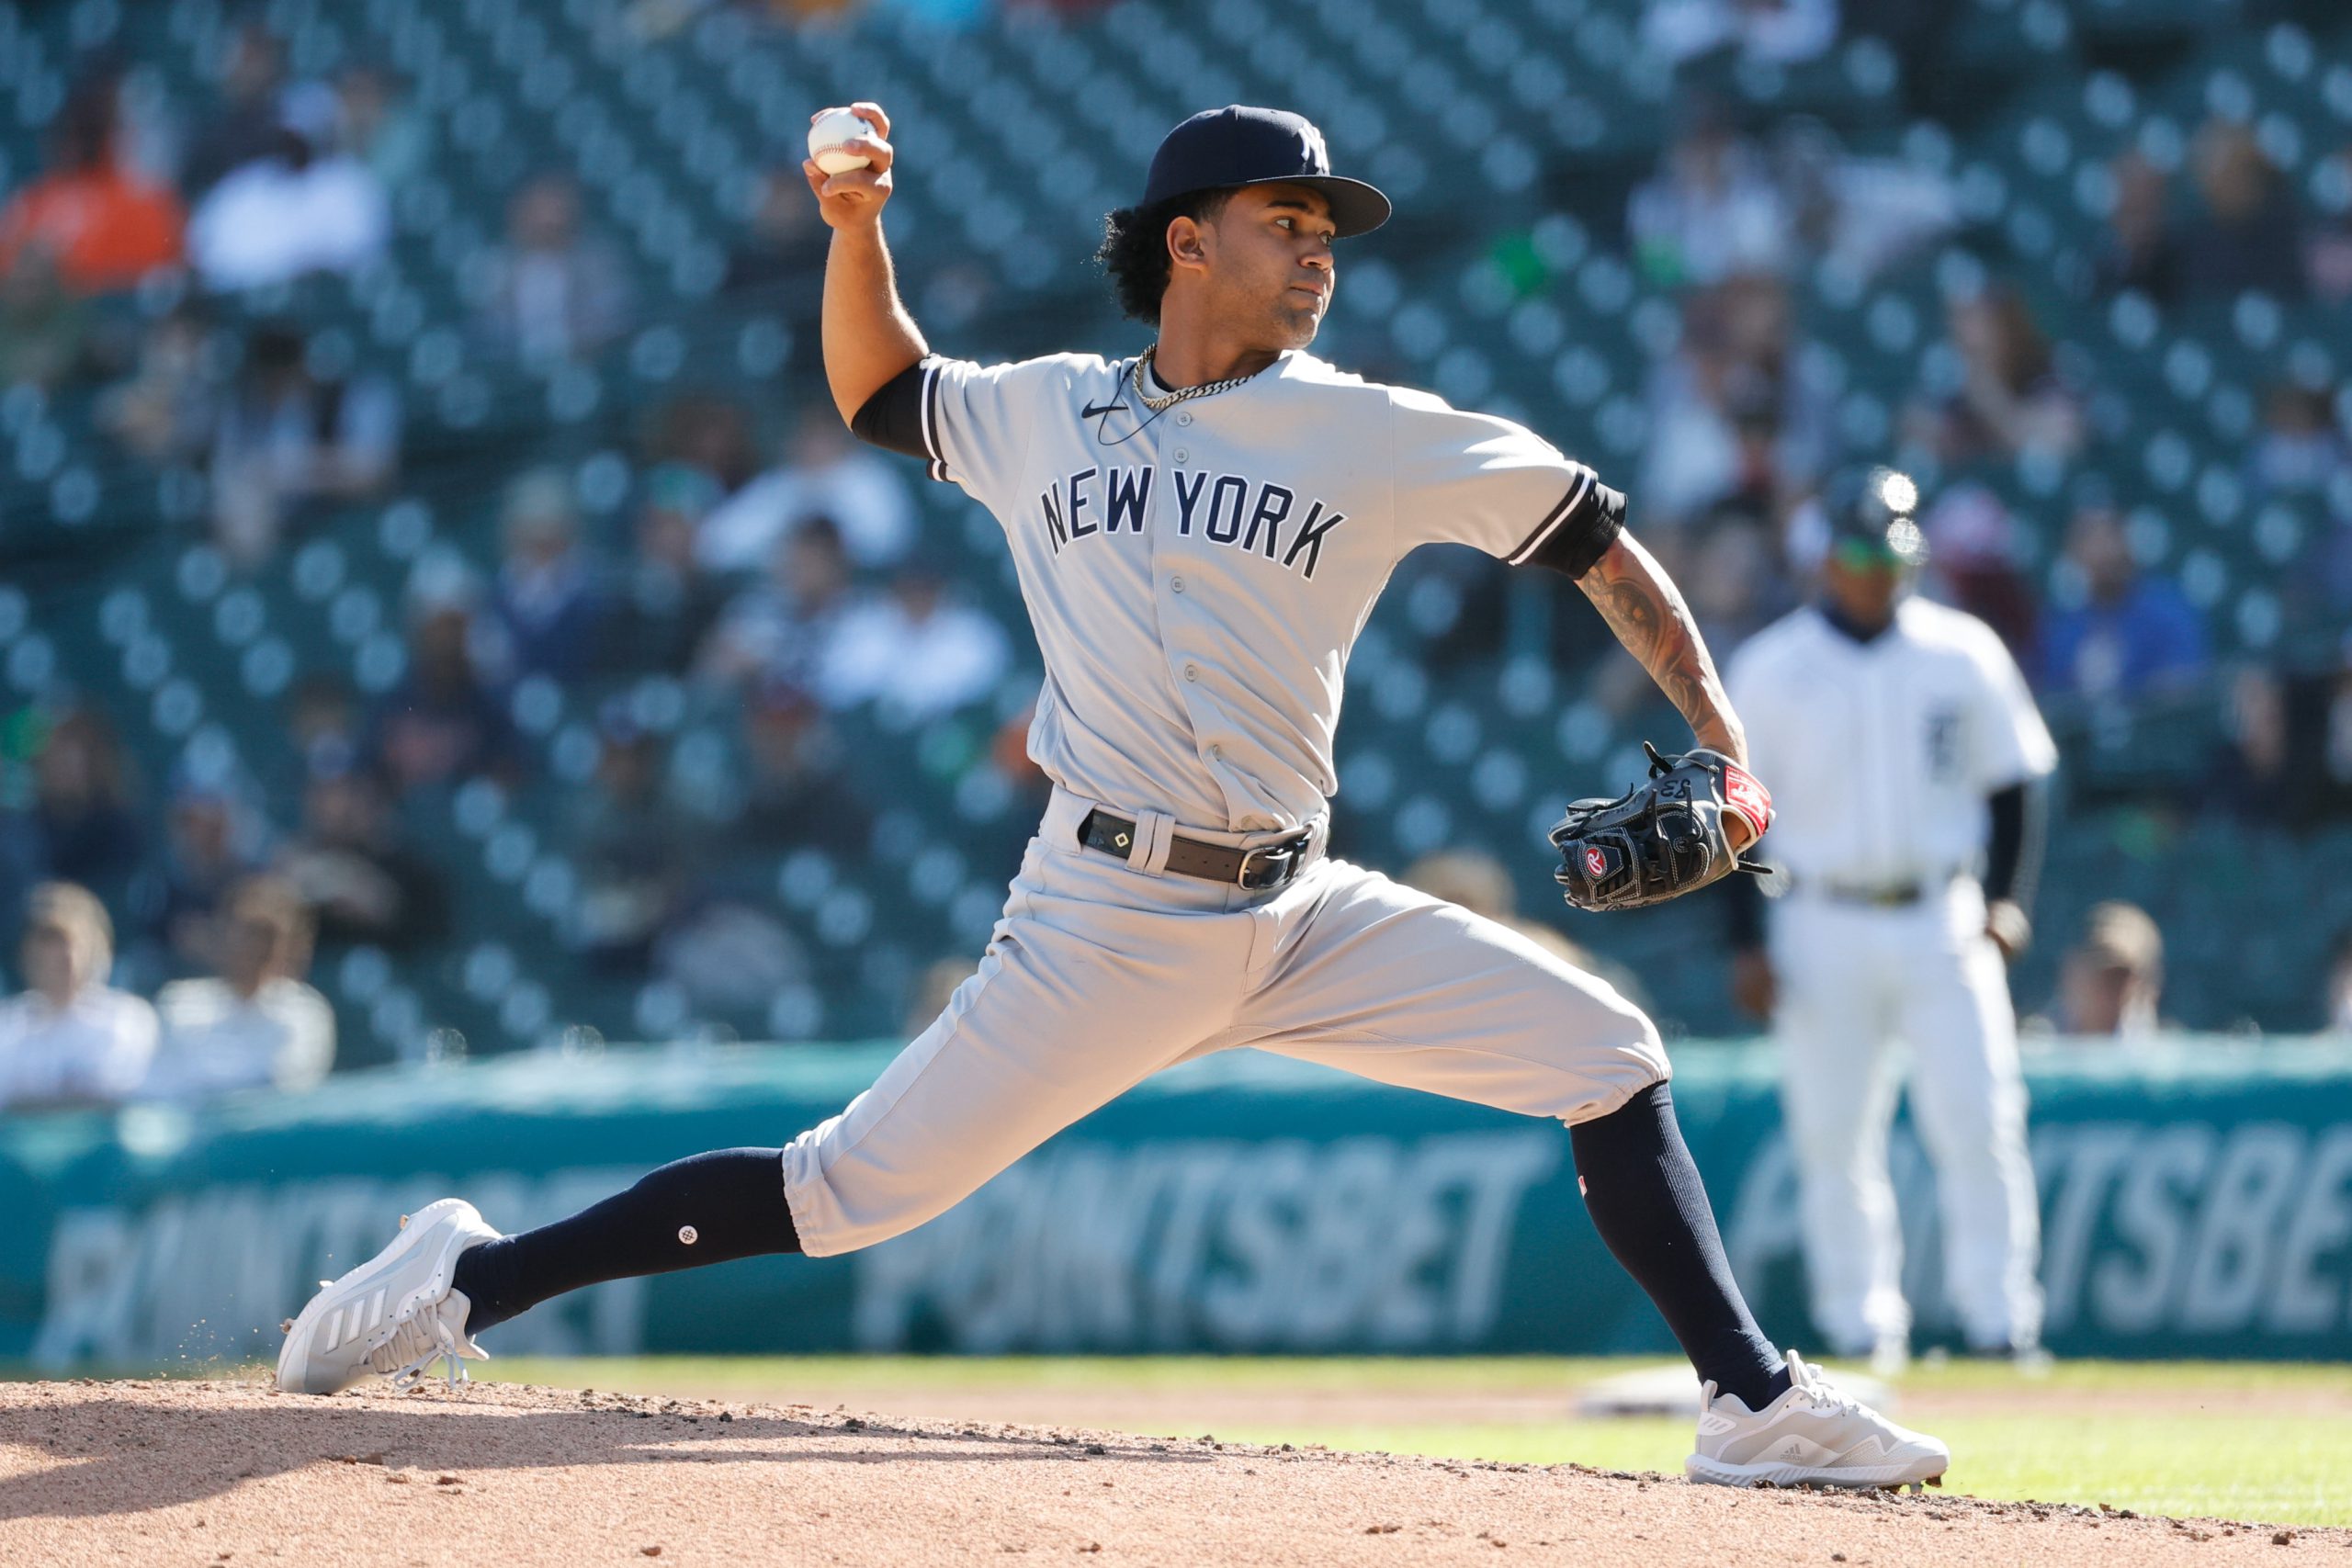 Top 10 Yankees prospects of 2022, presented by Pinstripe Alley